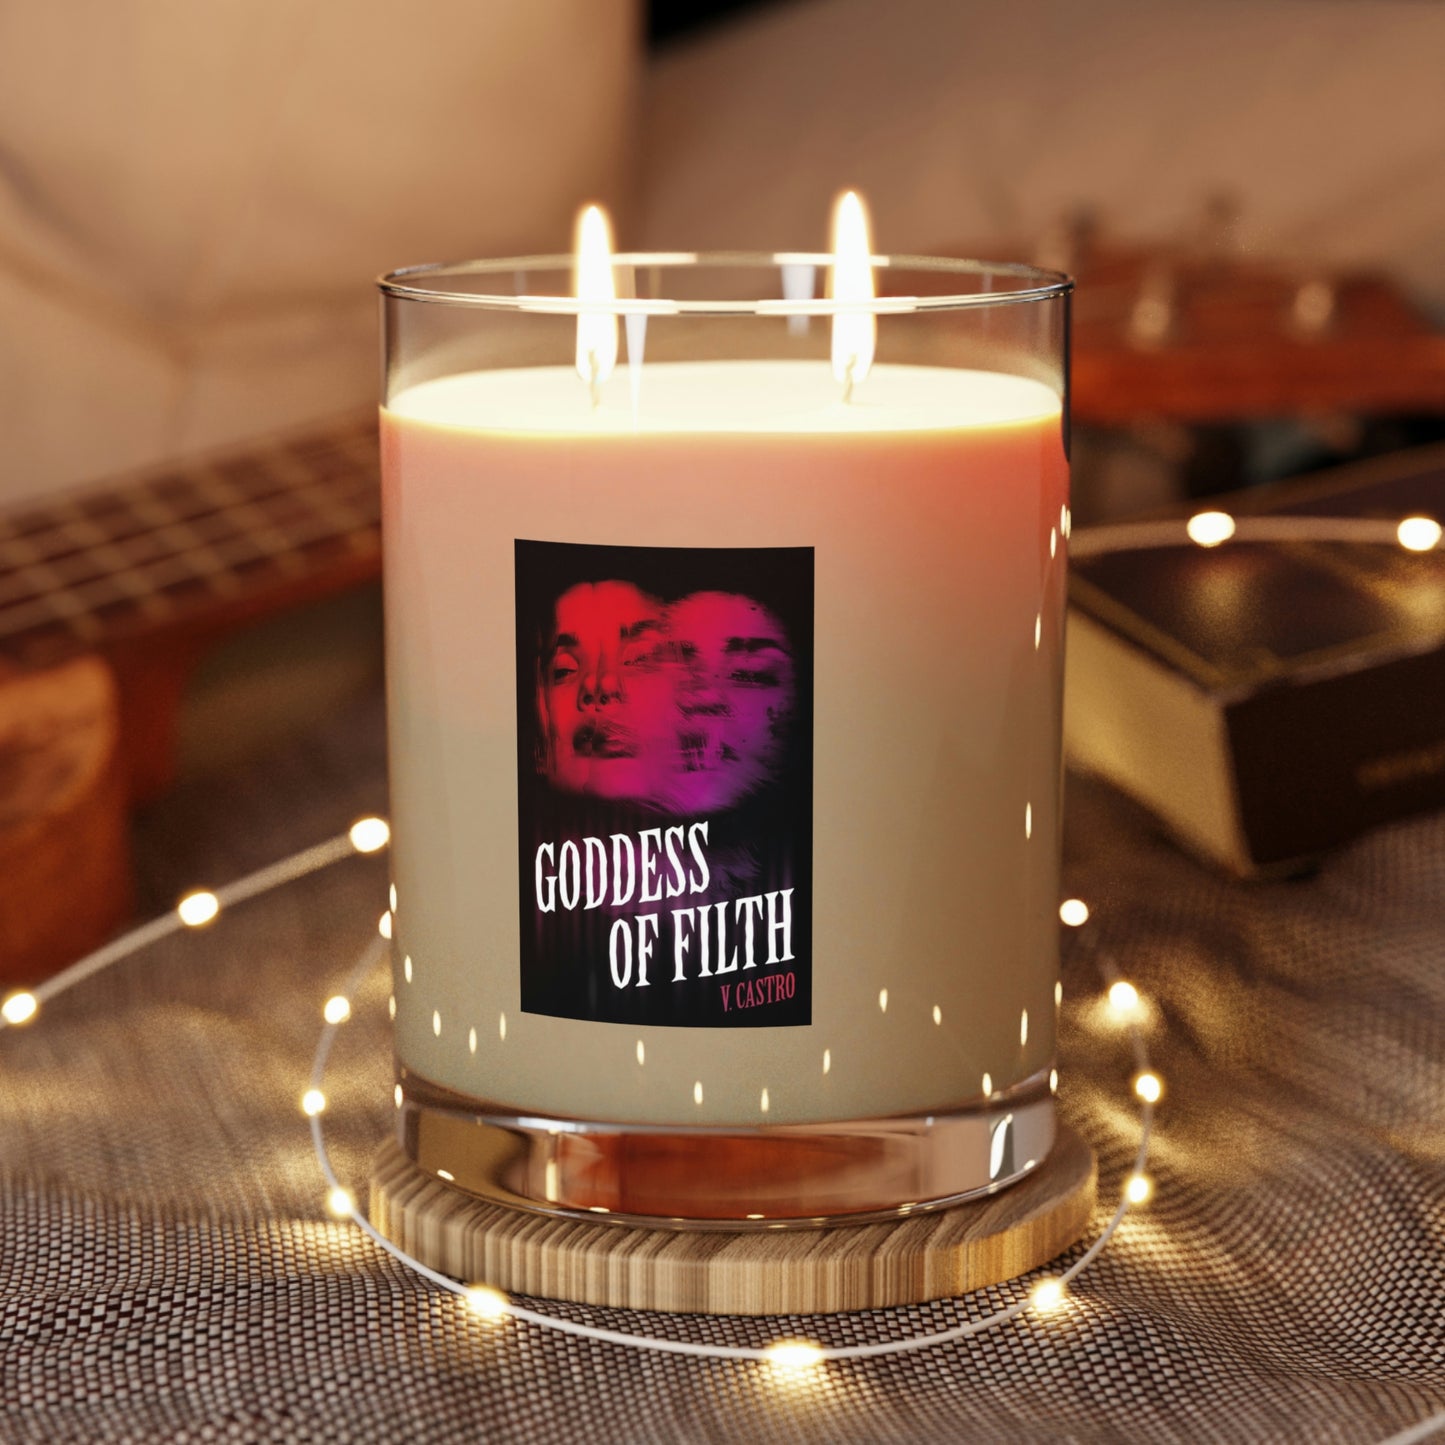 Goddess of Filth Scented Candle - Full Glass, 11oz